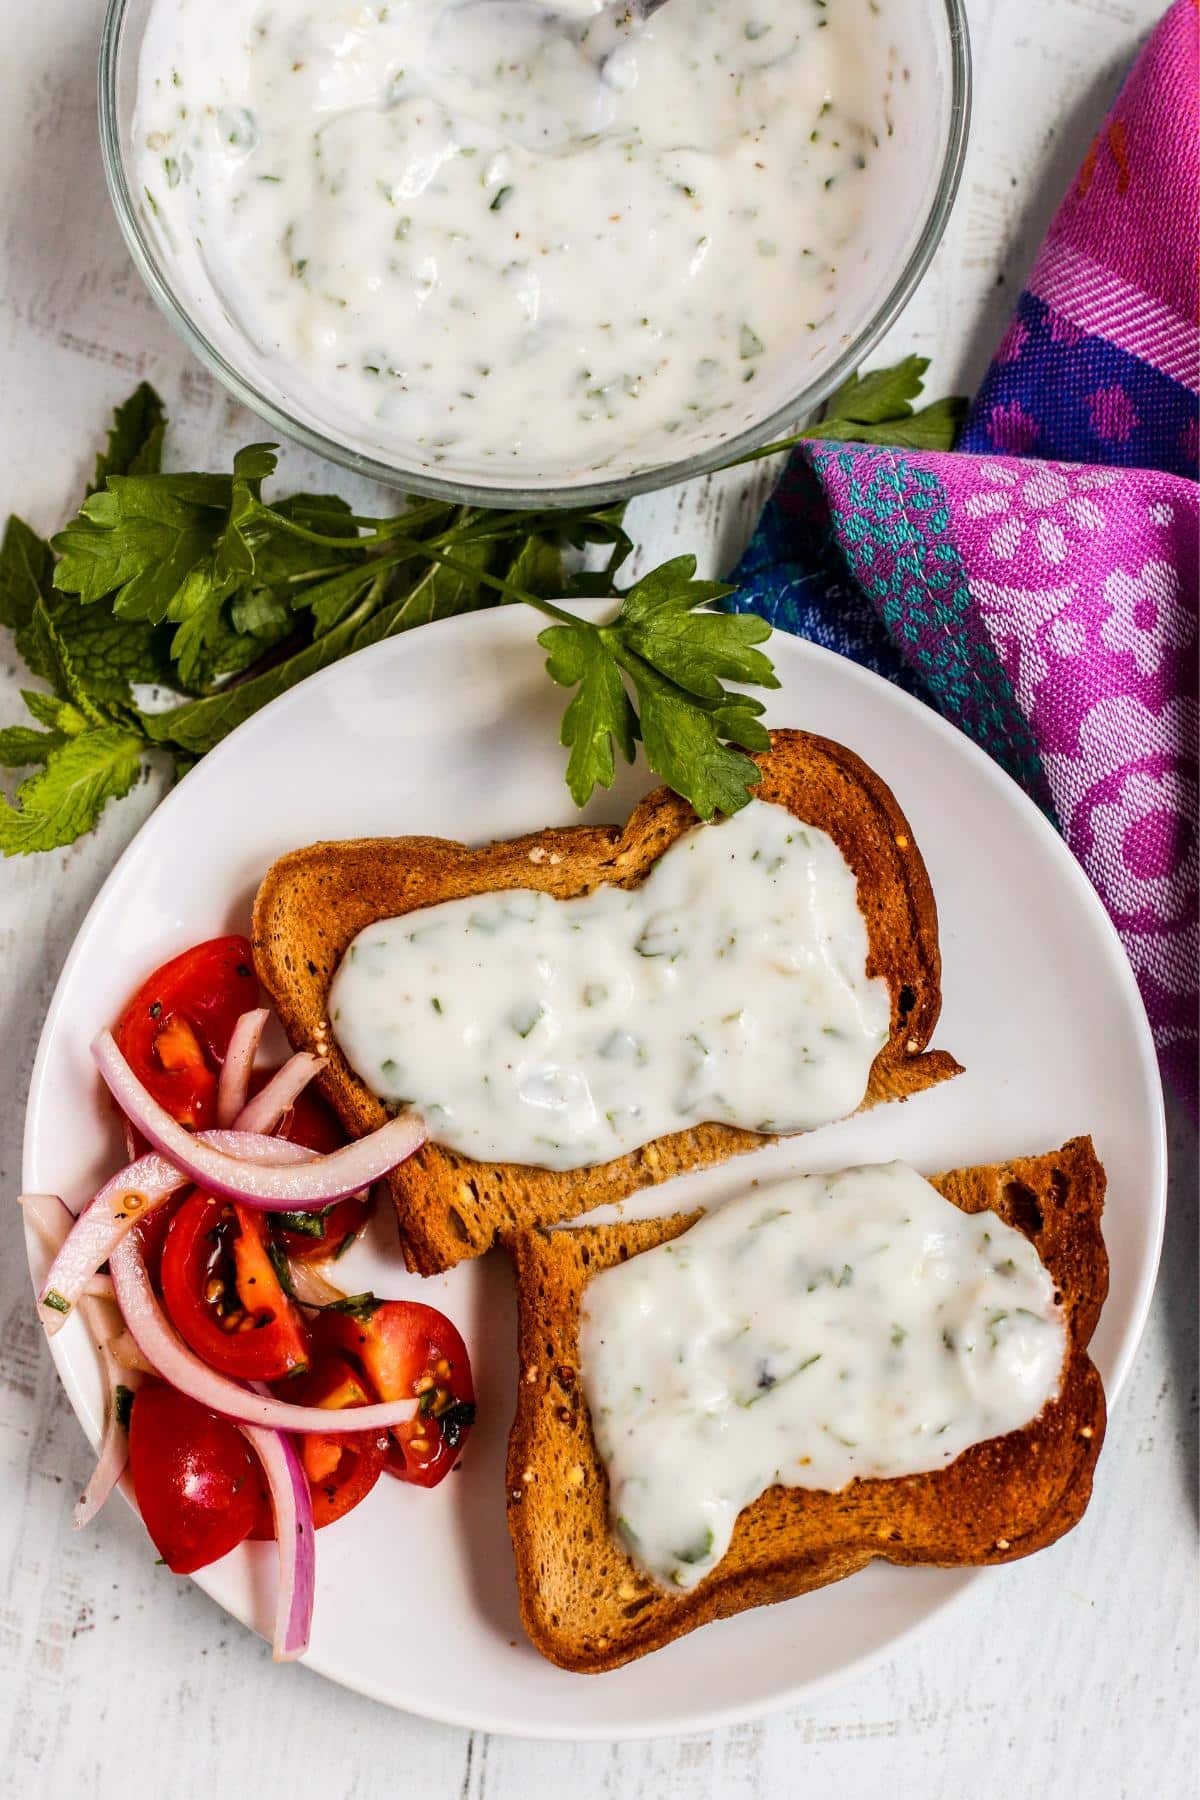 Whole grain toast topped with yogurt sauce and a side of tomato and red onion salad.